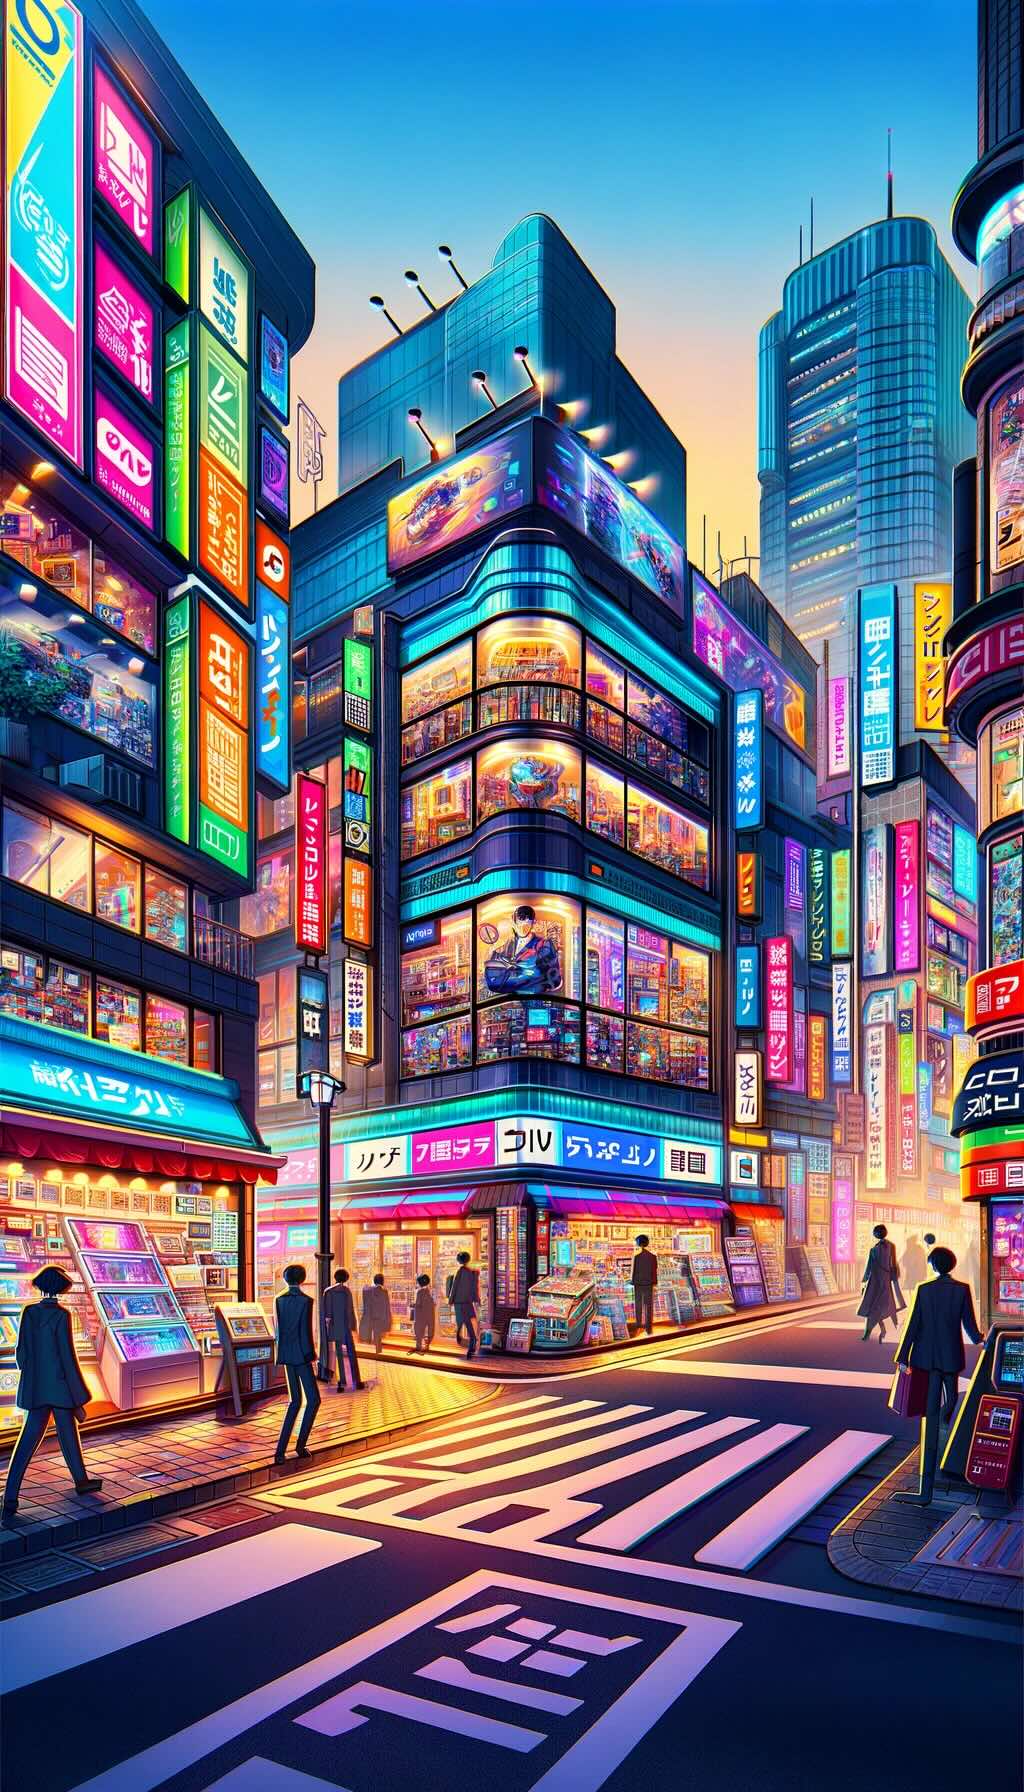 Vibrant and colorful scenes of Akihabara and Den Den Town in Japan, renowned for their electronics and gadget shops